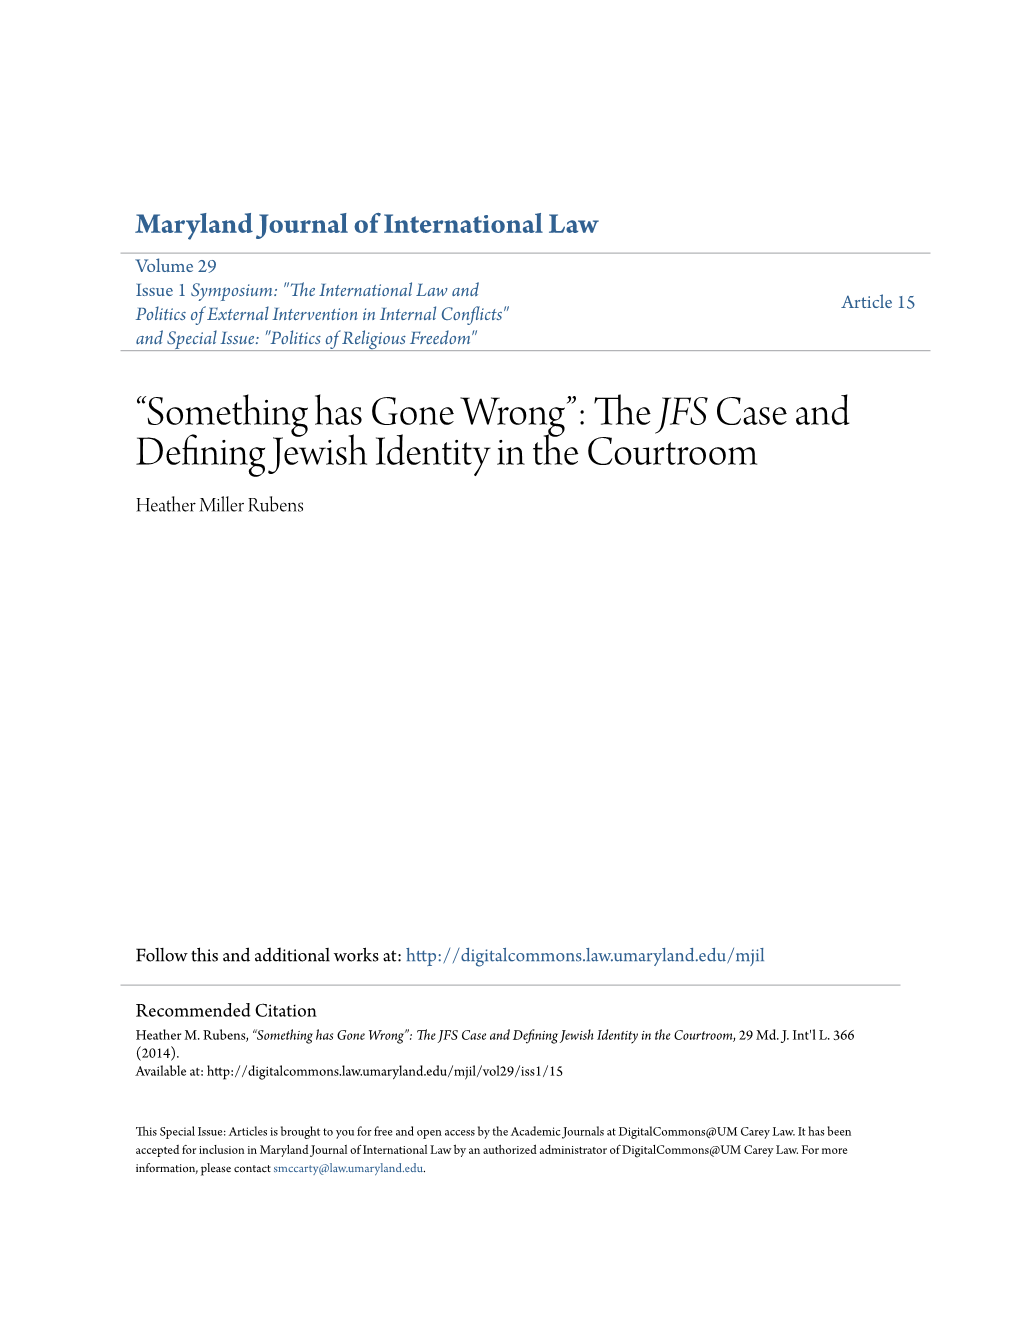 “Something Has Gone Wrong”: the JFS Case and Defining Jewish Identity in the Courtroom Heather Miller Rubens